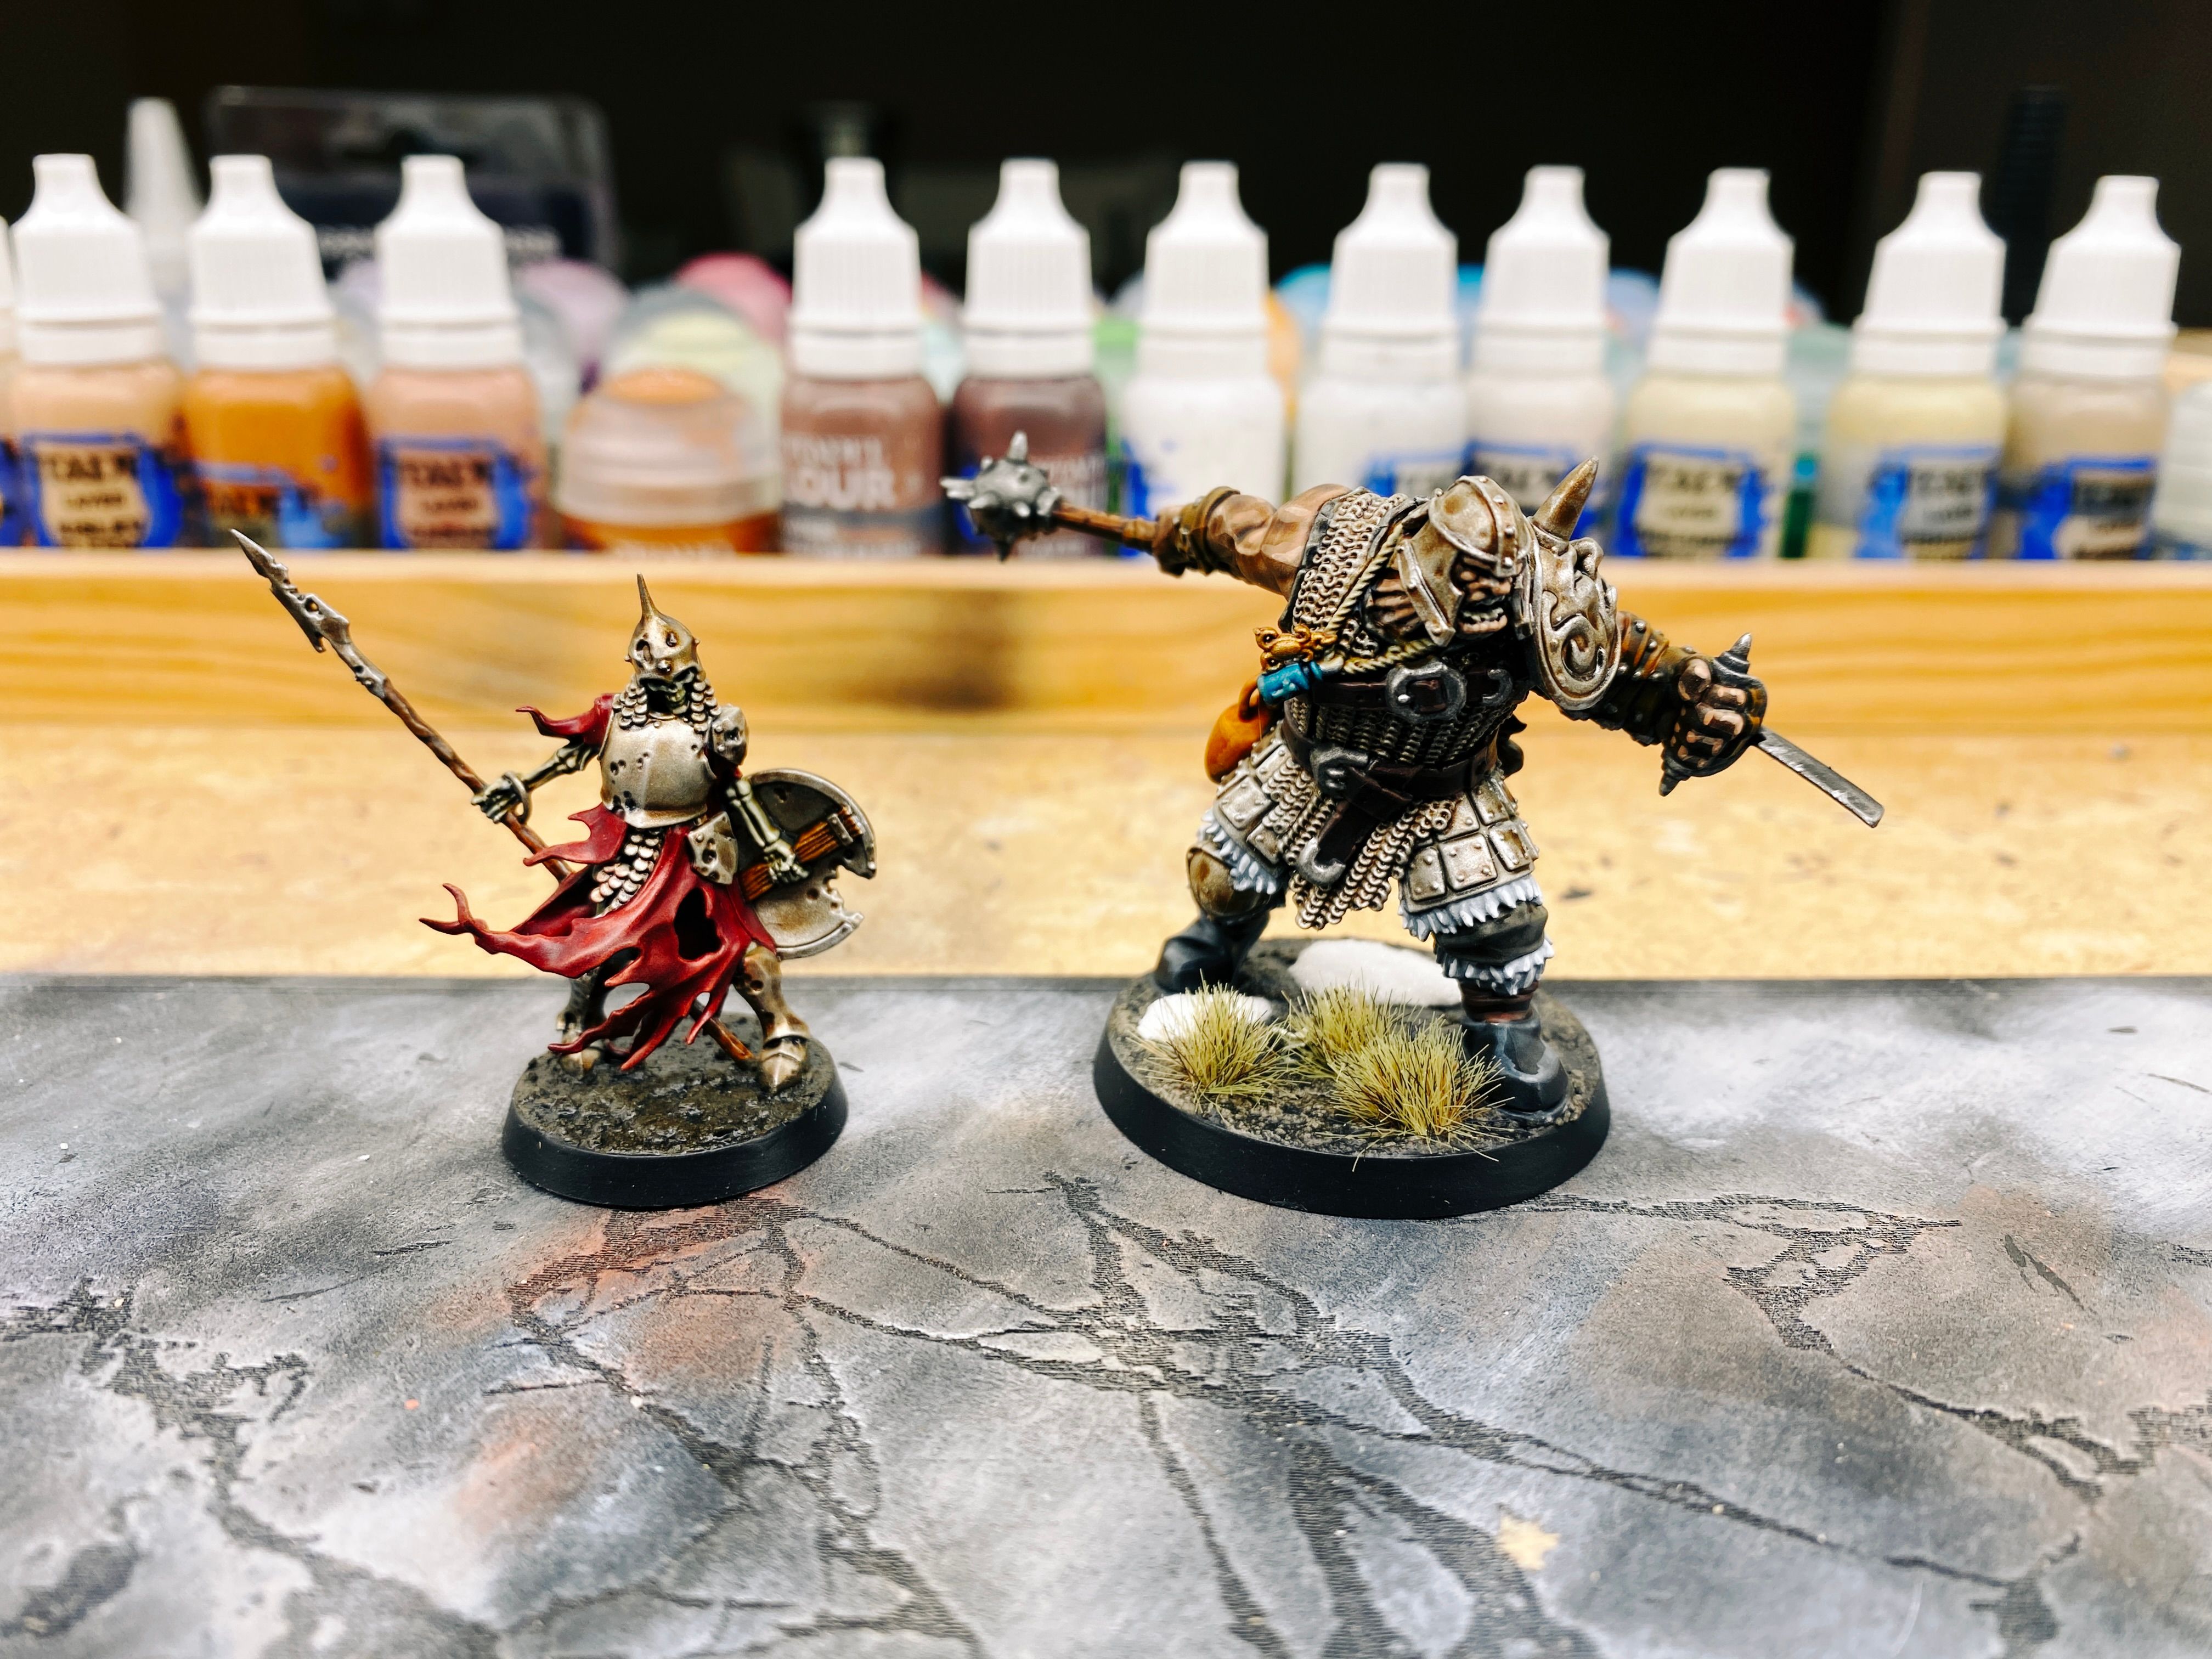 A photo of two miniatures side-by-side. One is a standard human-sized skeleton warrior, the other is an ogre who is head and shoulders taller than the skeleton. The ogre is wearing chainmail and a big helmet that leaves his face exposed, and has a big mace held out in one hand behind him like he's either about to hit something or has just finished doing a big backhand swing with it. In his other hand is clenched a big blade that's attached to a leather glove and that arm looks like he's about to stab someone with it.